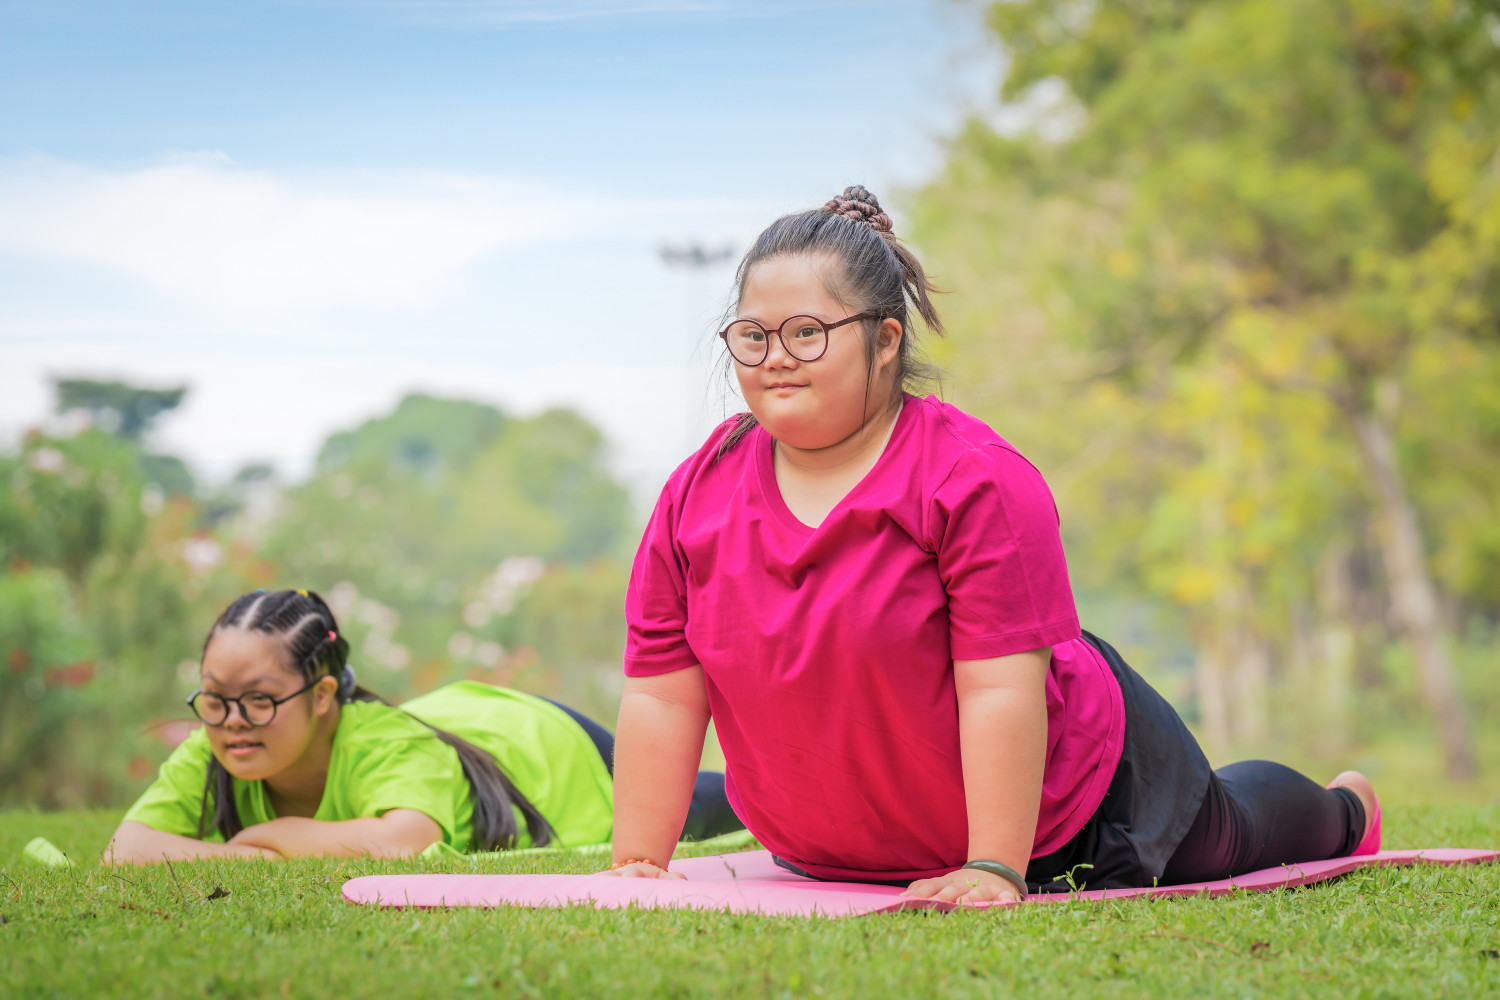 Two young woman with Down syndrome engaging in an outdoor yoga class.